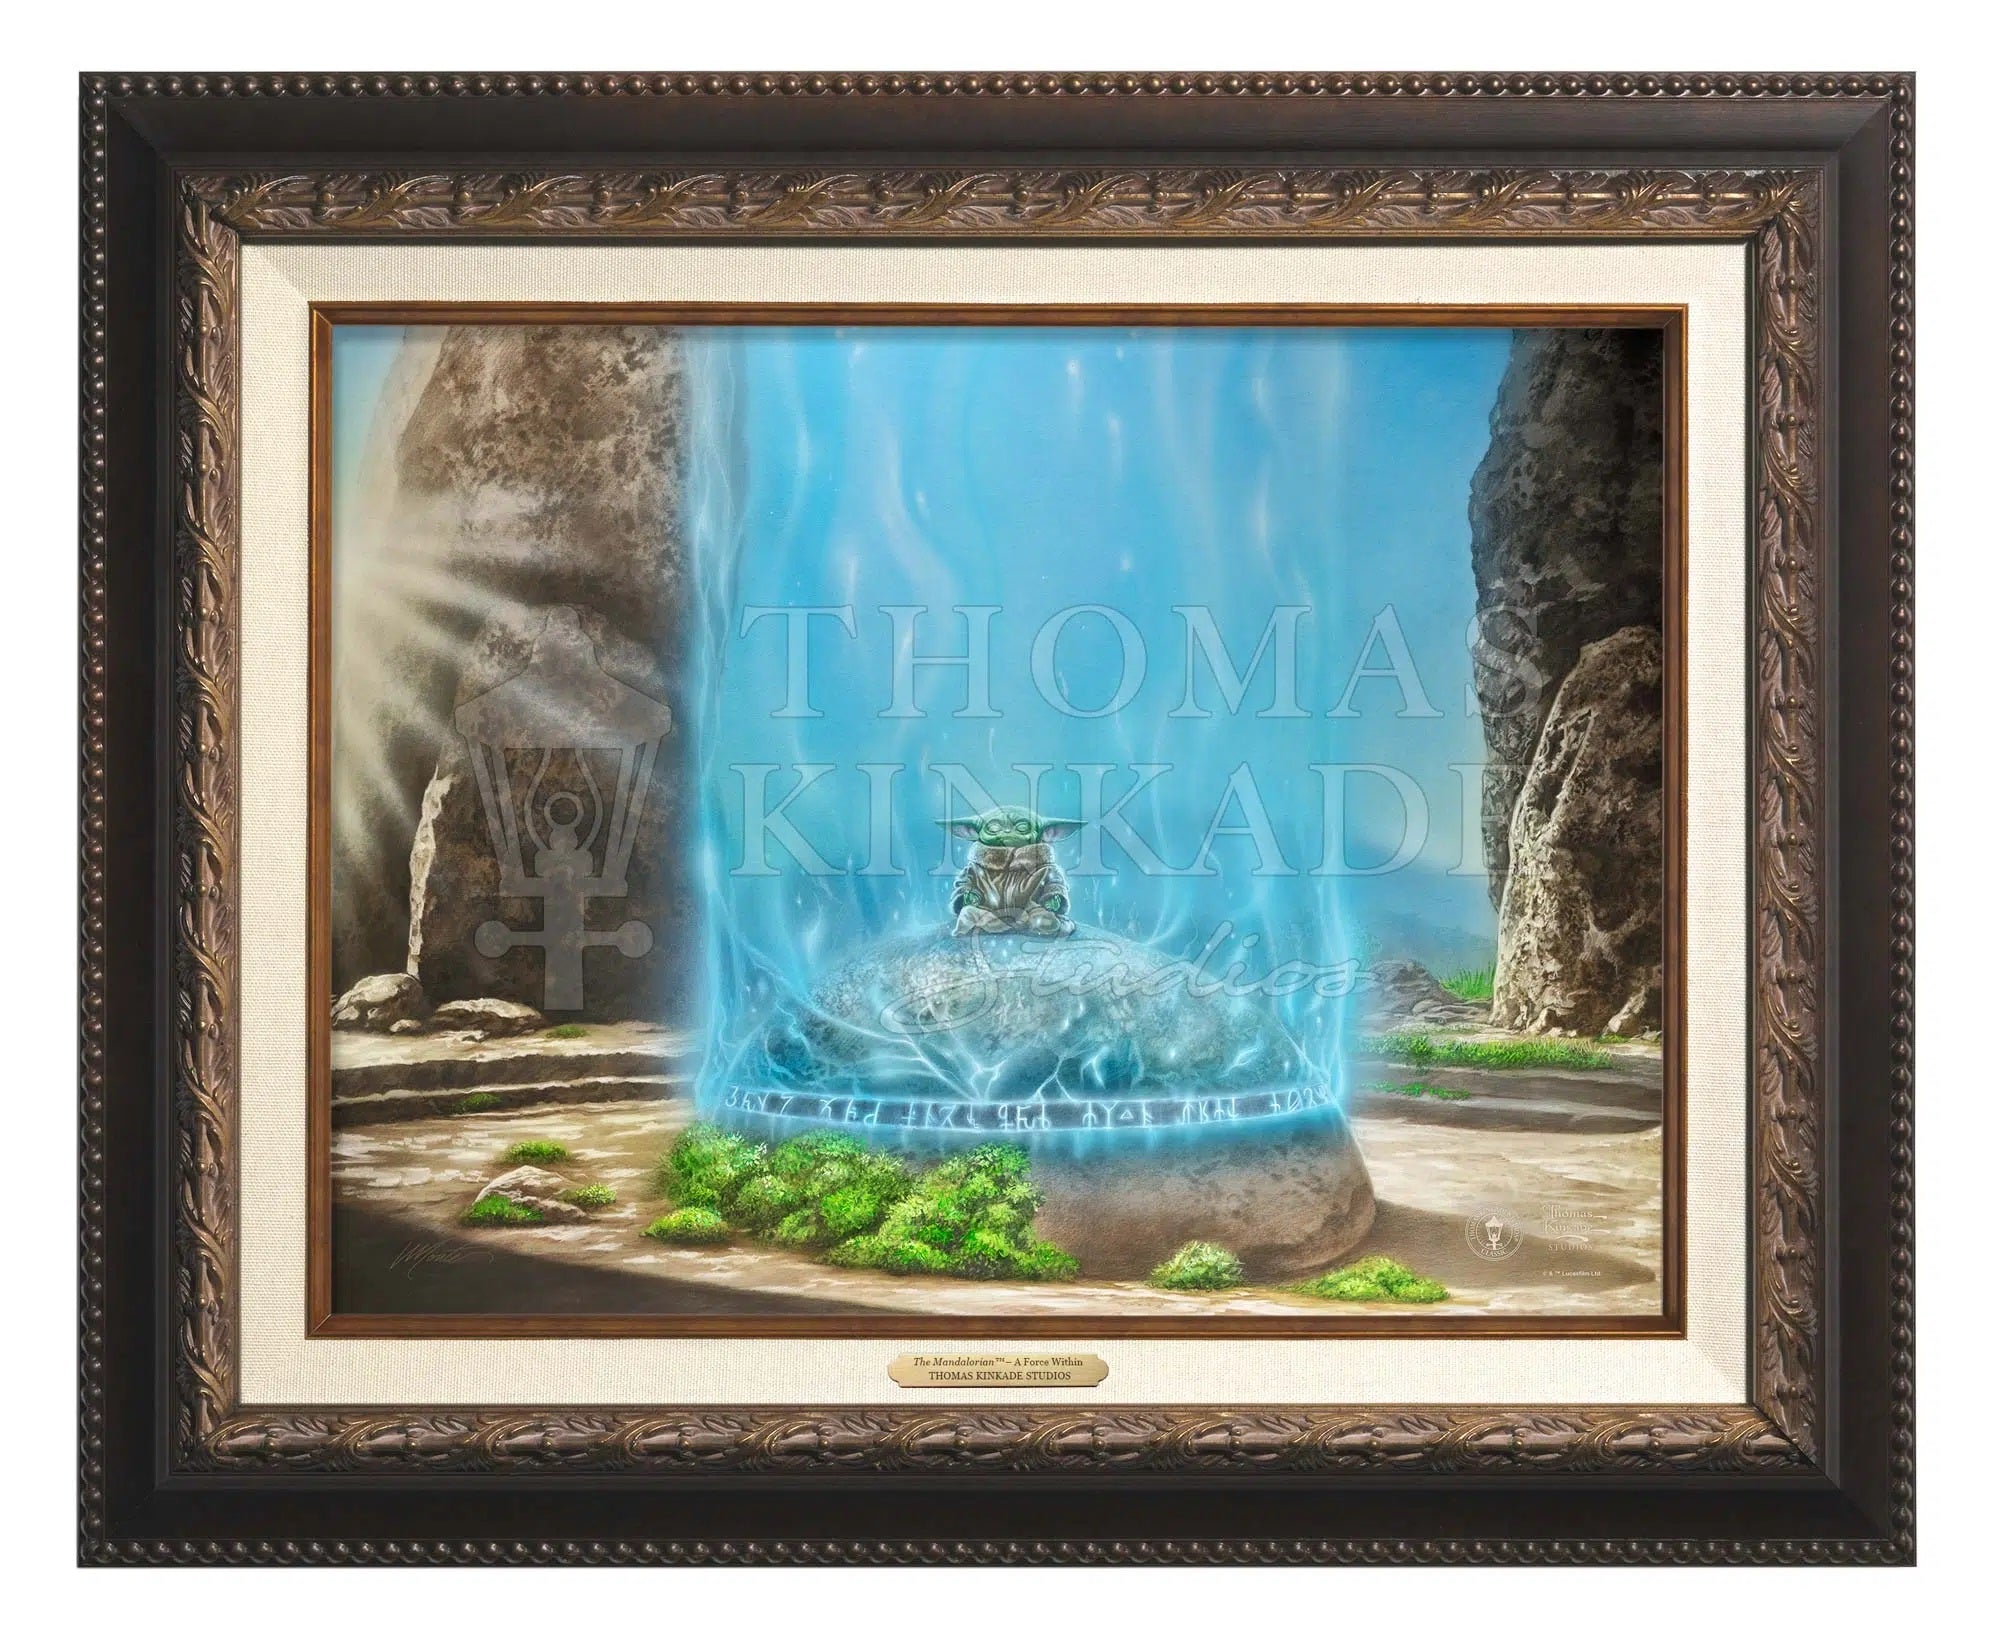  The Mandalorian - A Force Within by Thomas Kinkade Studios.  Once placed upon the ancient Jedi™ seeing stone, Grogu™ “activates” the stone to make the connection with the galaxy’s existing Jedi through the Force.  - Aged Bronze Frame